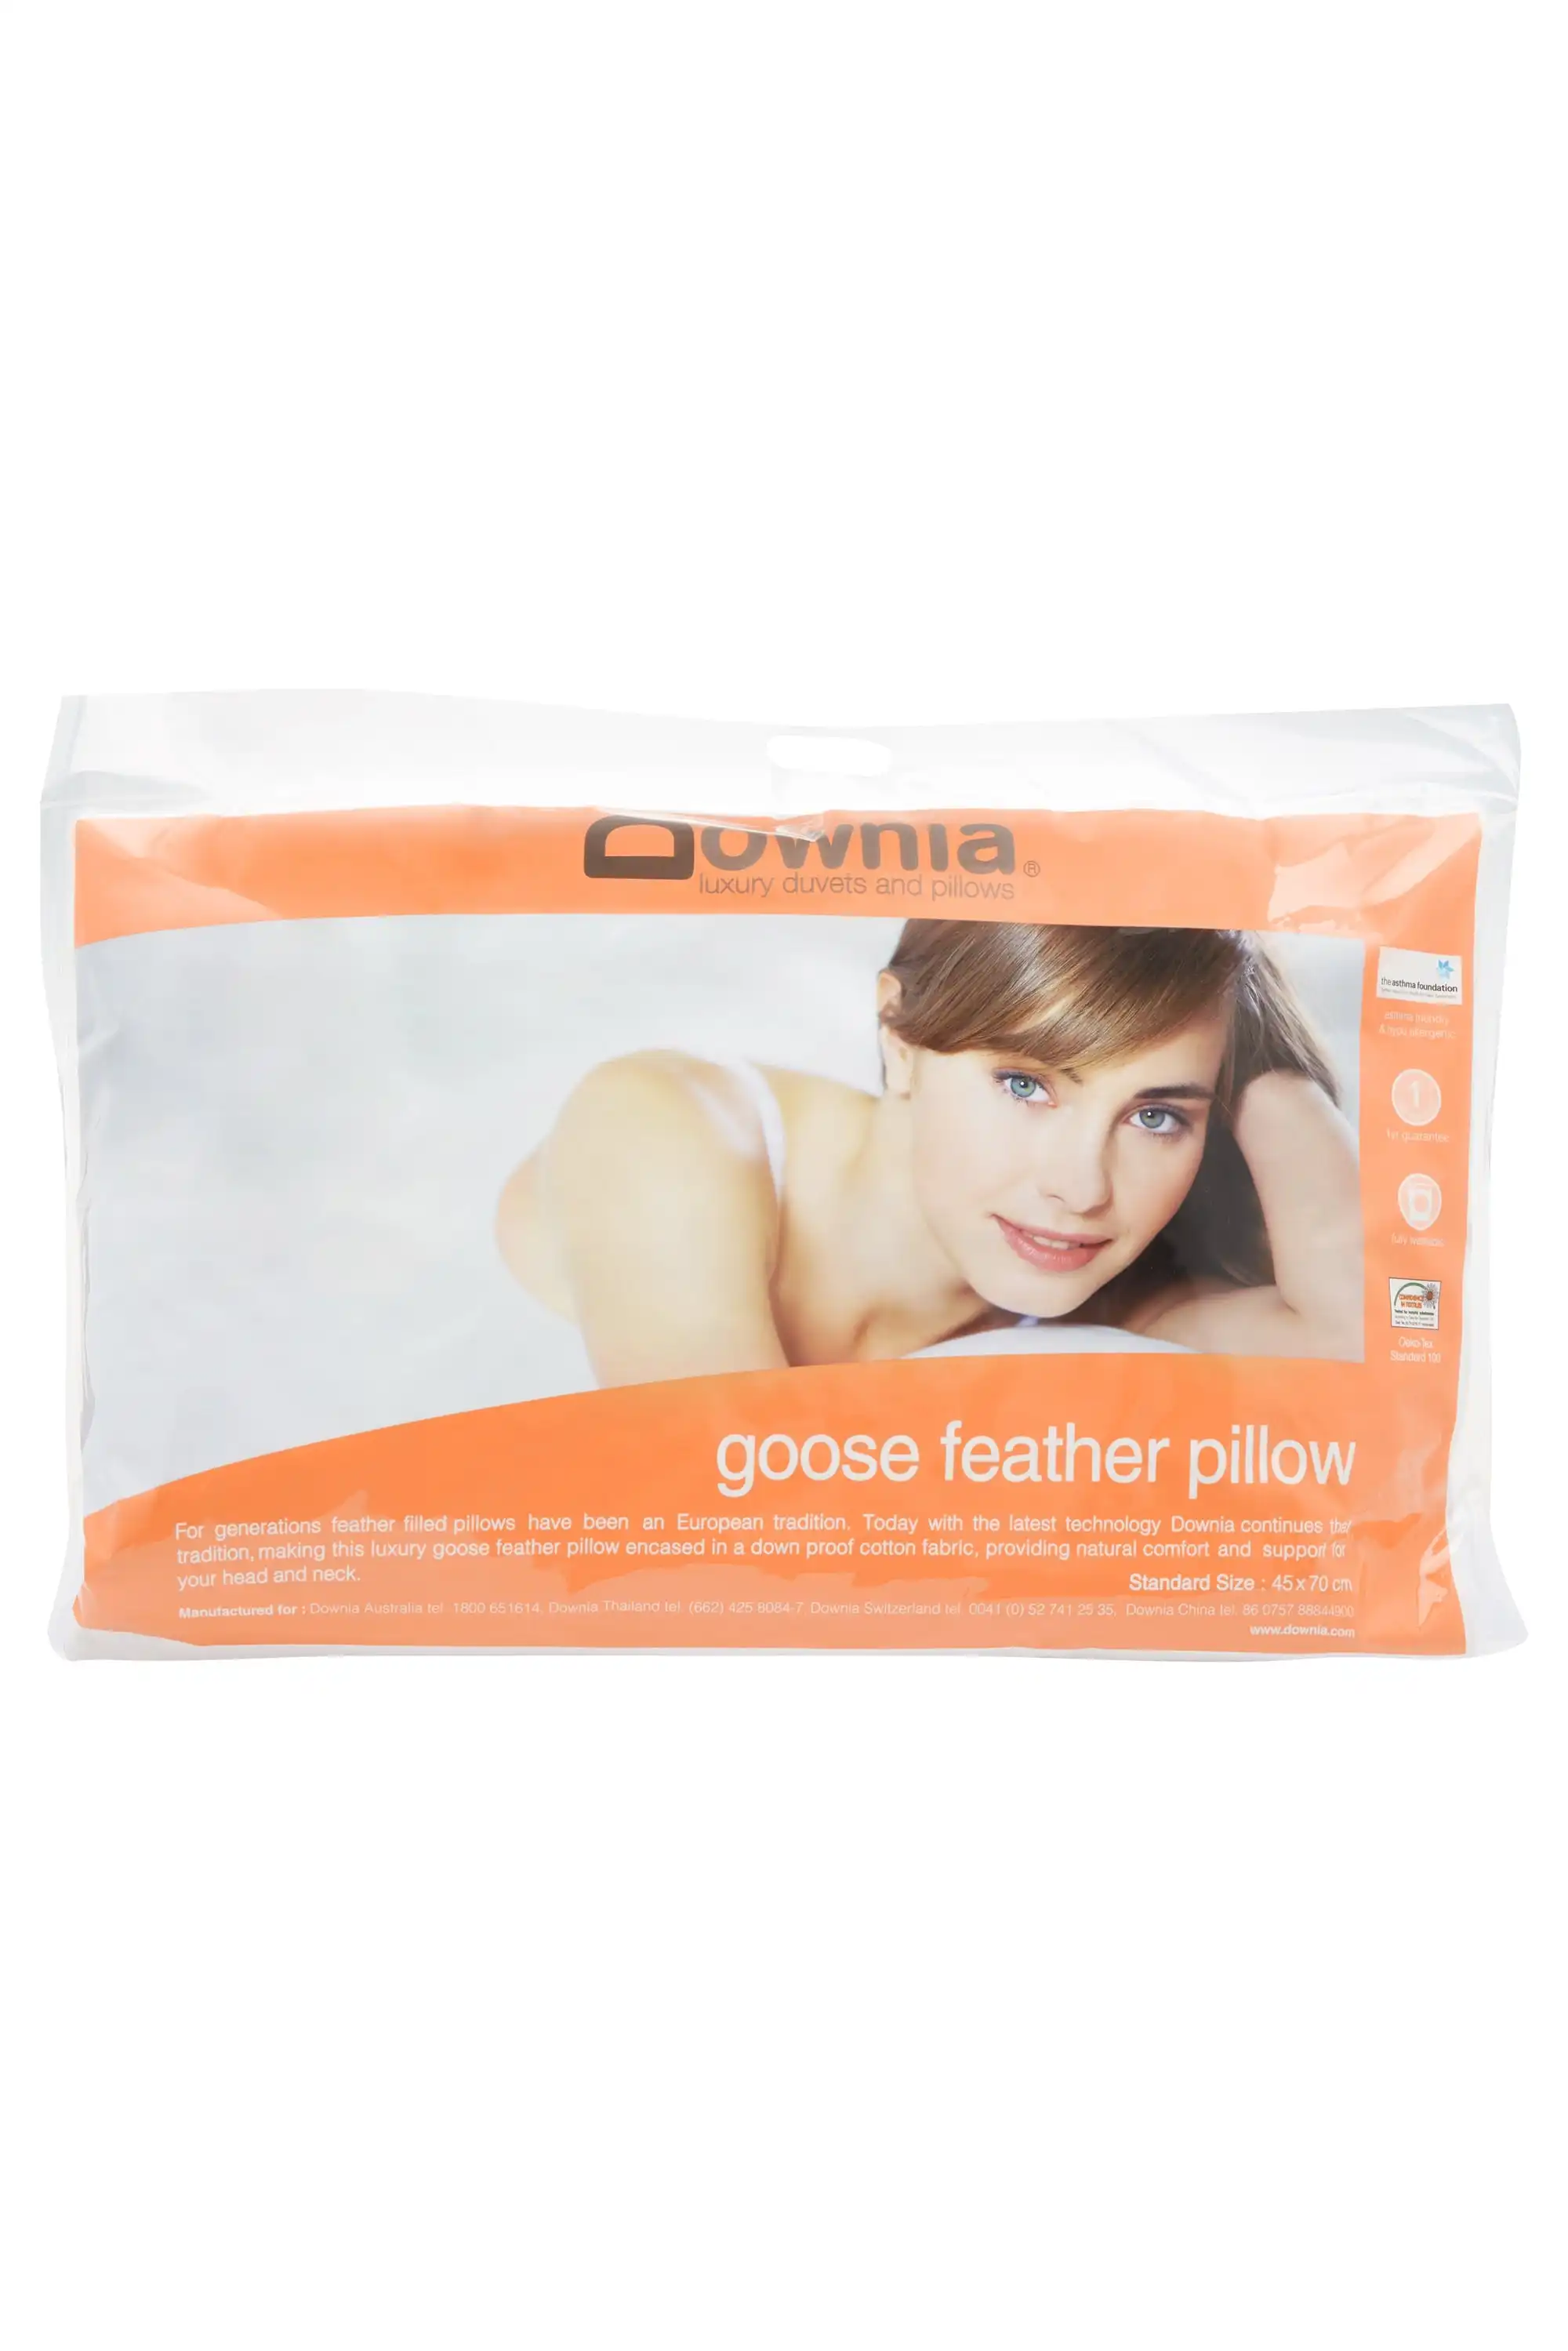 Downia GOOSE FEATHER PILLOW - Firm